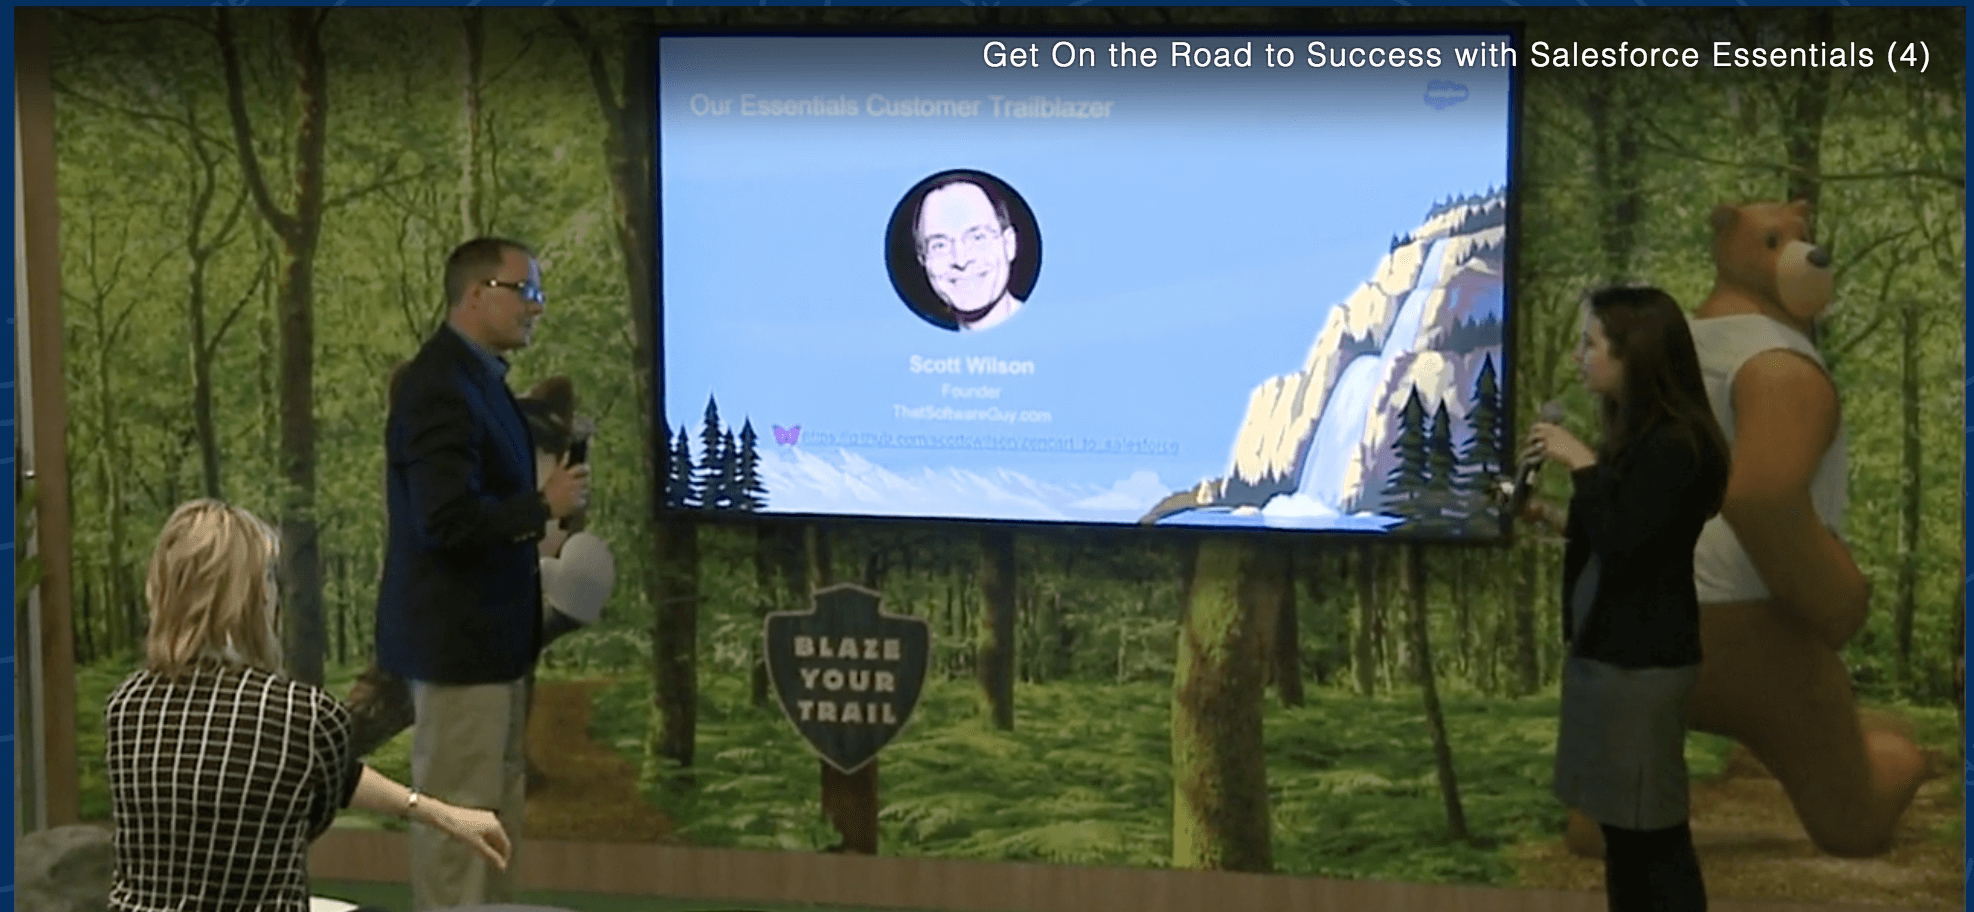 That Software Guy speaks at Dreamforce 2018